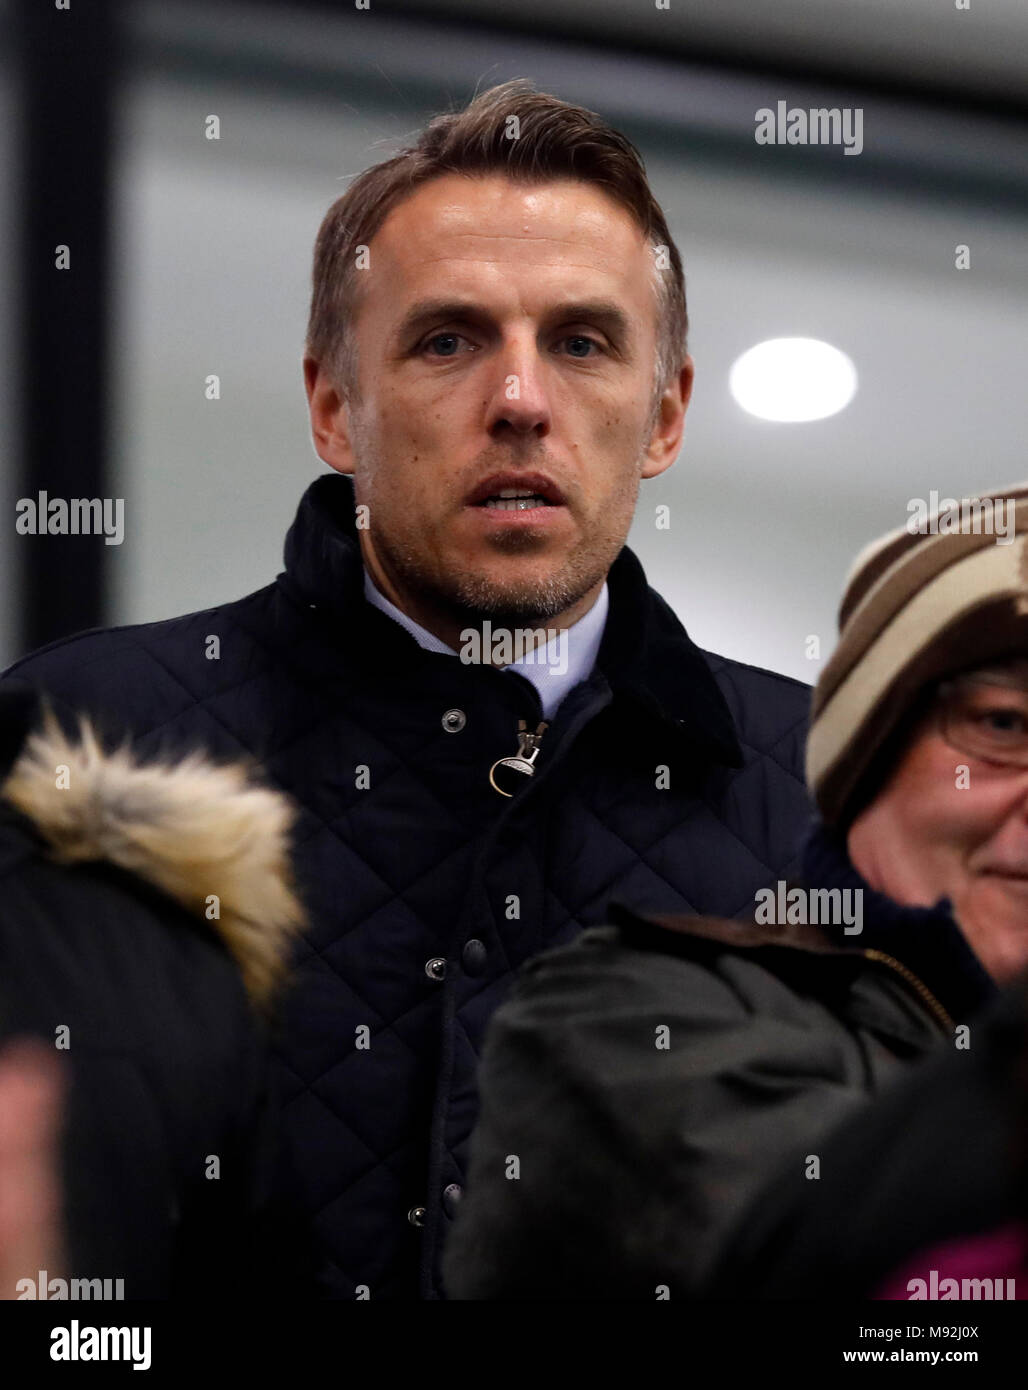 England Women's manager Phil Neville in the stands during the Women's Champions League, Quarter Final at the City Football Academy, Manchester. Stock Photo